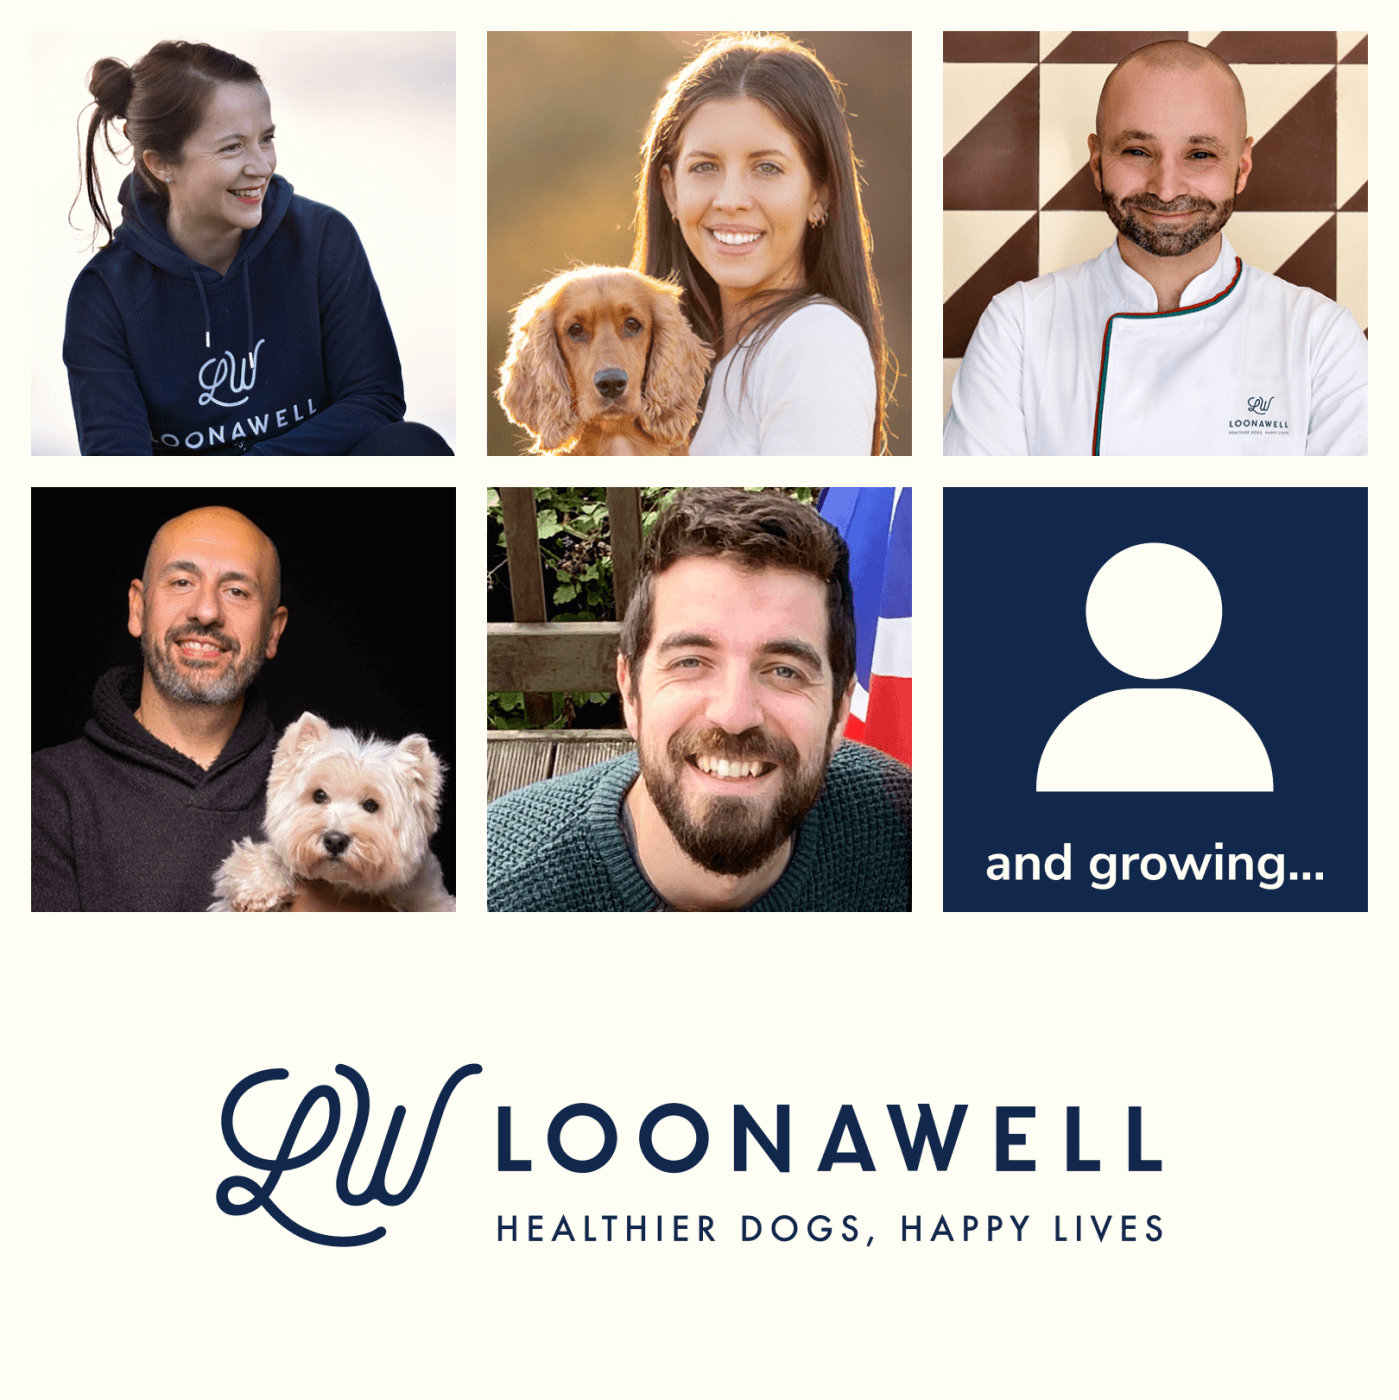 Presenting: The LOONAWELL Team